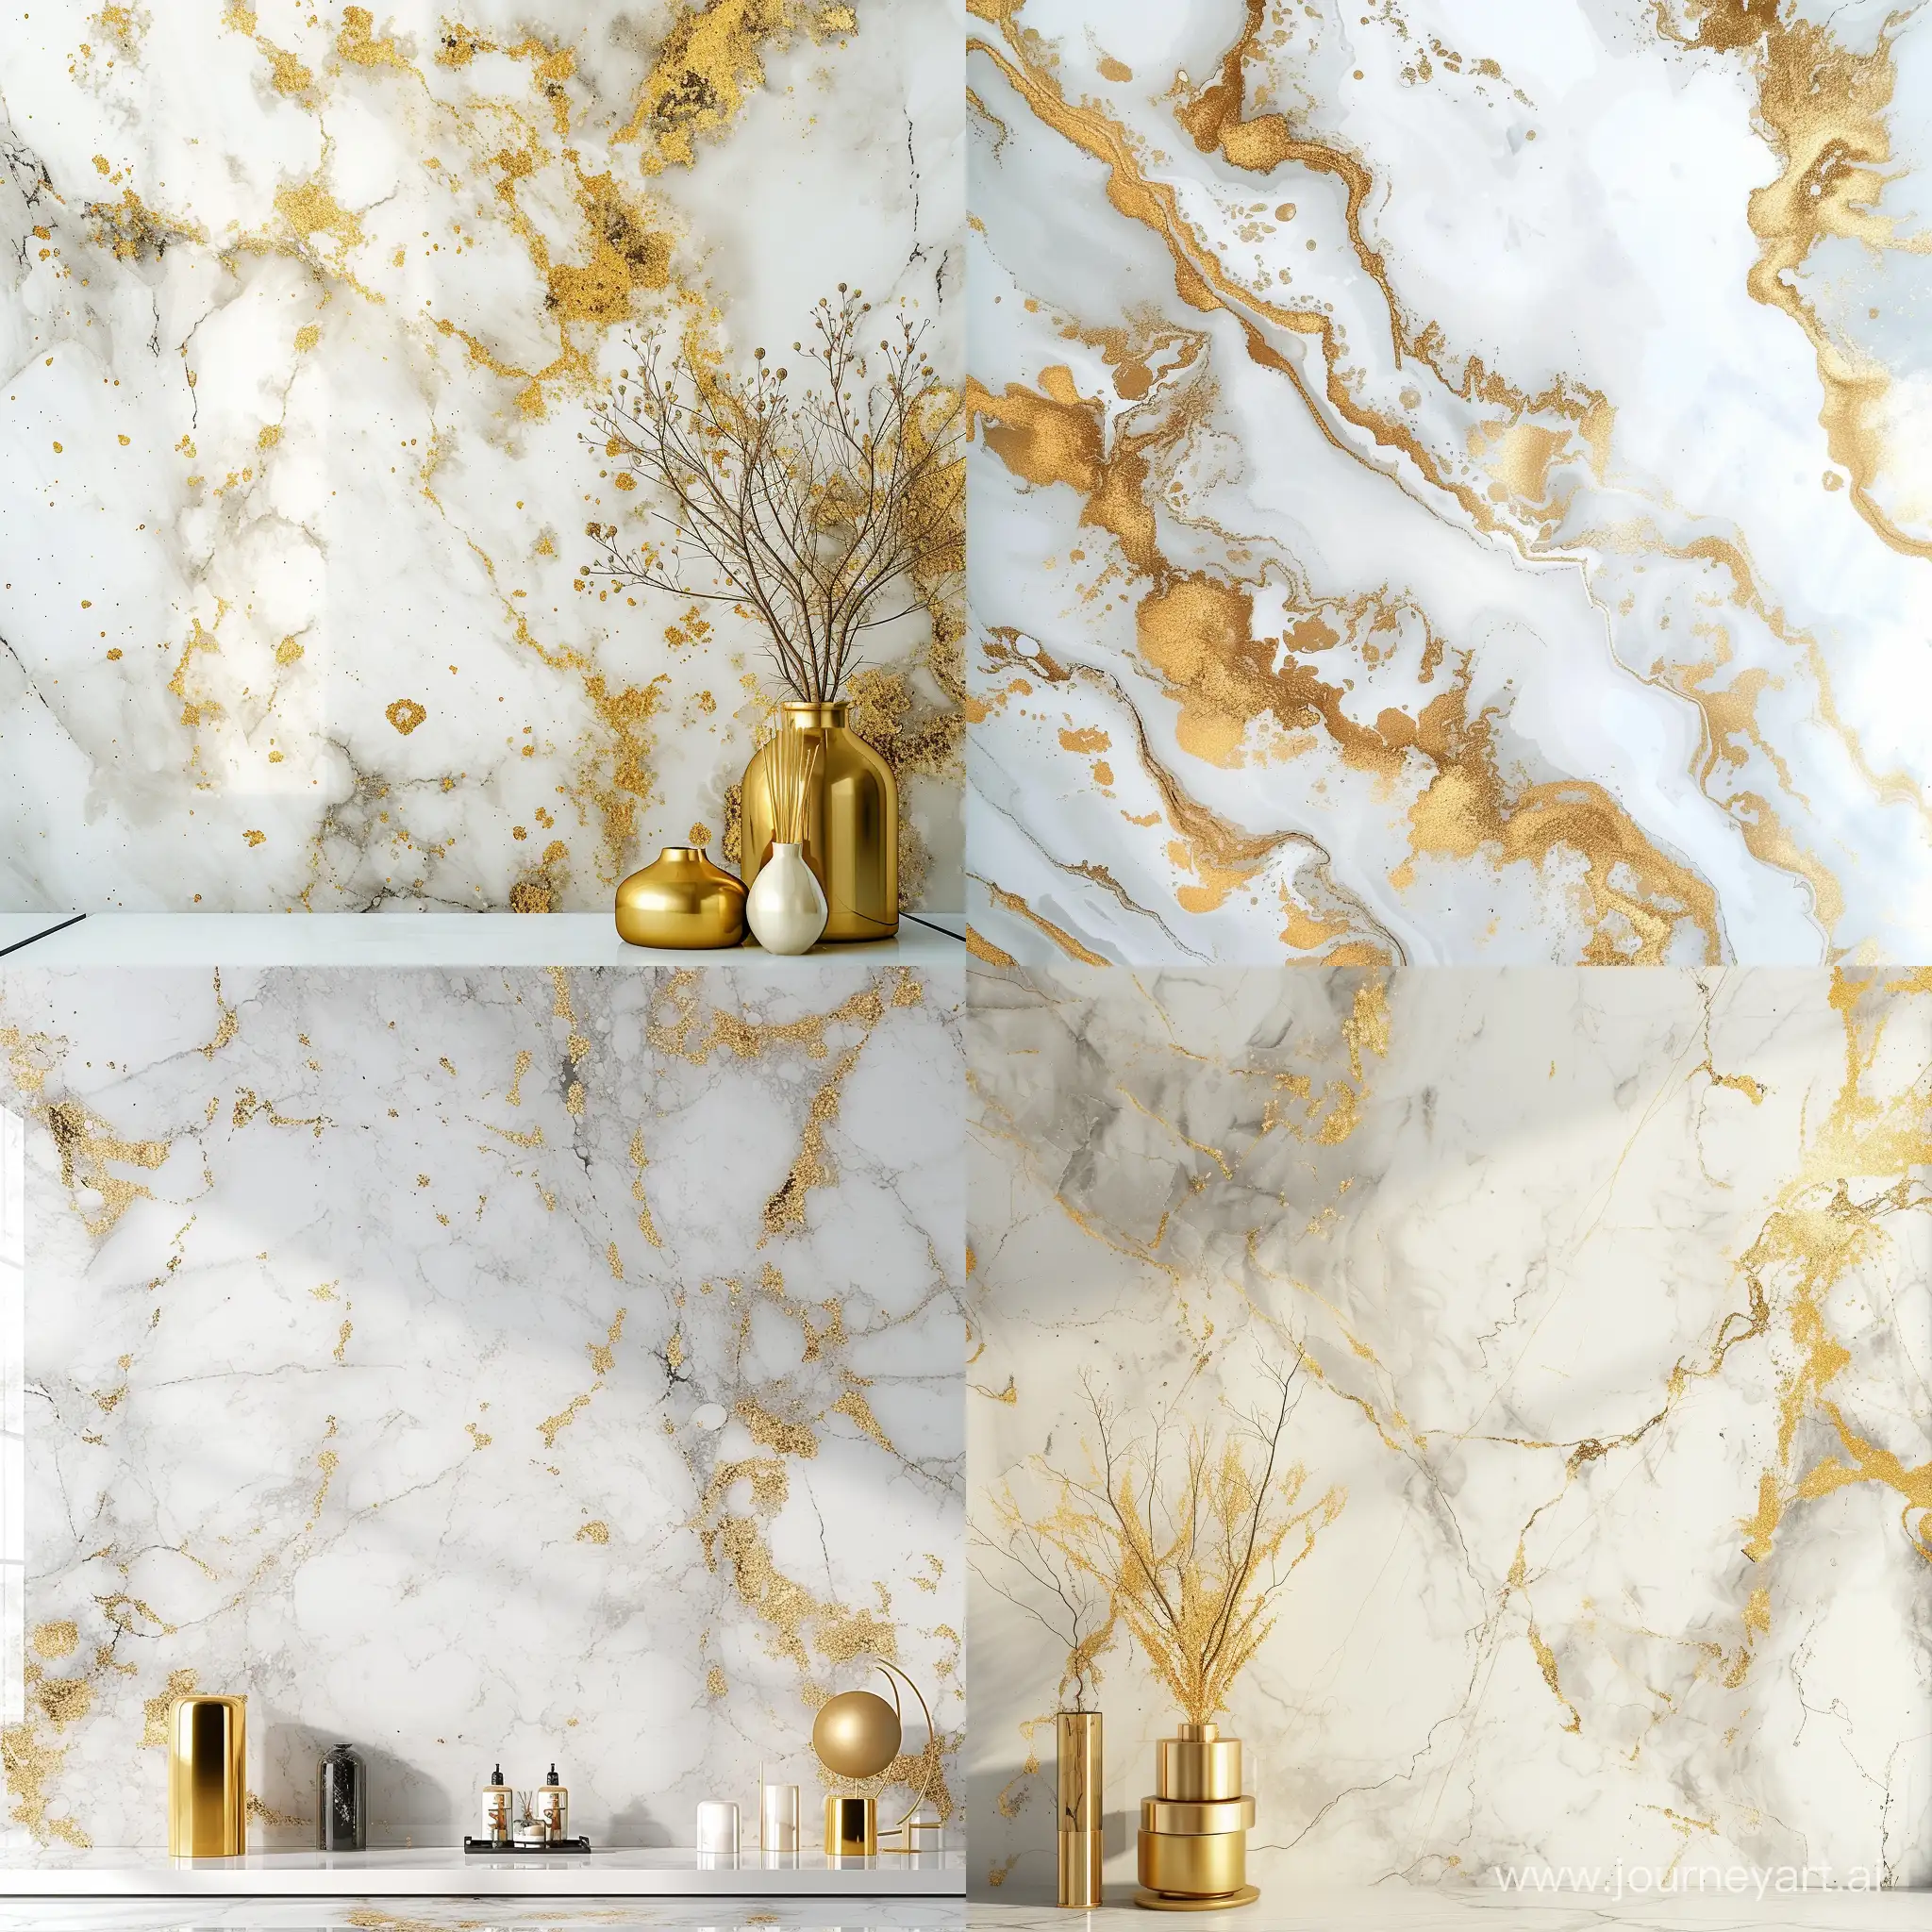 marble wallpaper with gold and white marbles in a room, baroque marble and gold in space, white calacatta gold marble, white marble and gold, marble and gold, white marble with gold accents, gilded marbled paper background, marble and hint gold, heavenly marble, gold and luxury materials, made of liquid metal and marble, marble countertops, marble slabs